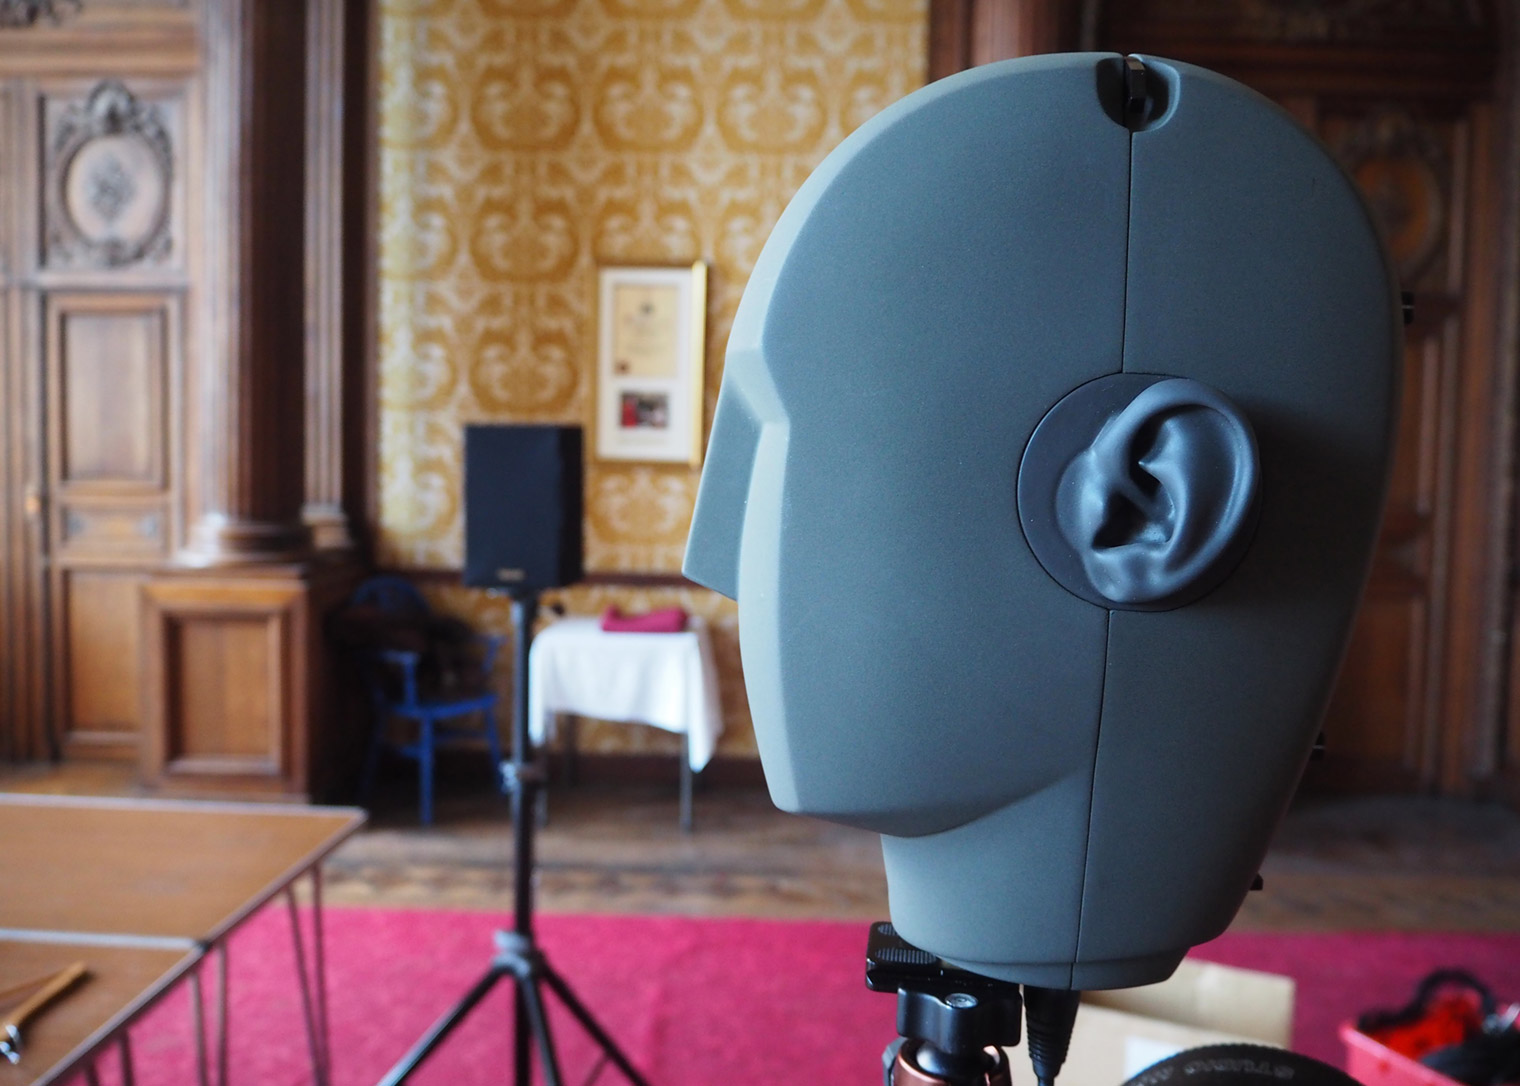 Sound captured in the two microphone "ears" of a binaural recording head mimics the 3-D experience we hear with our own ears. Photo by Nina Diamond